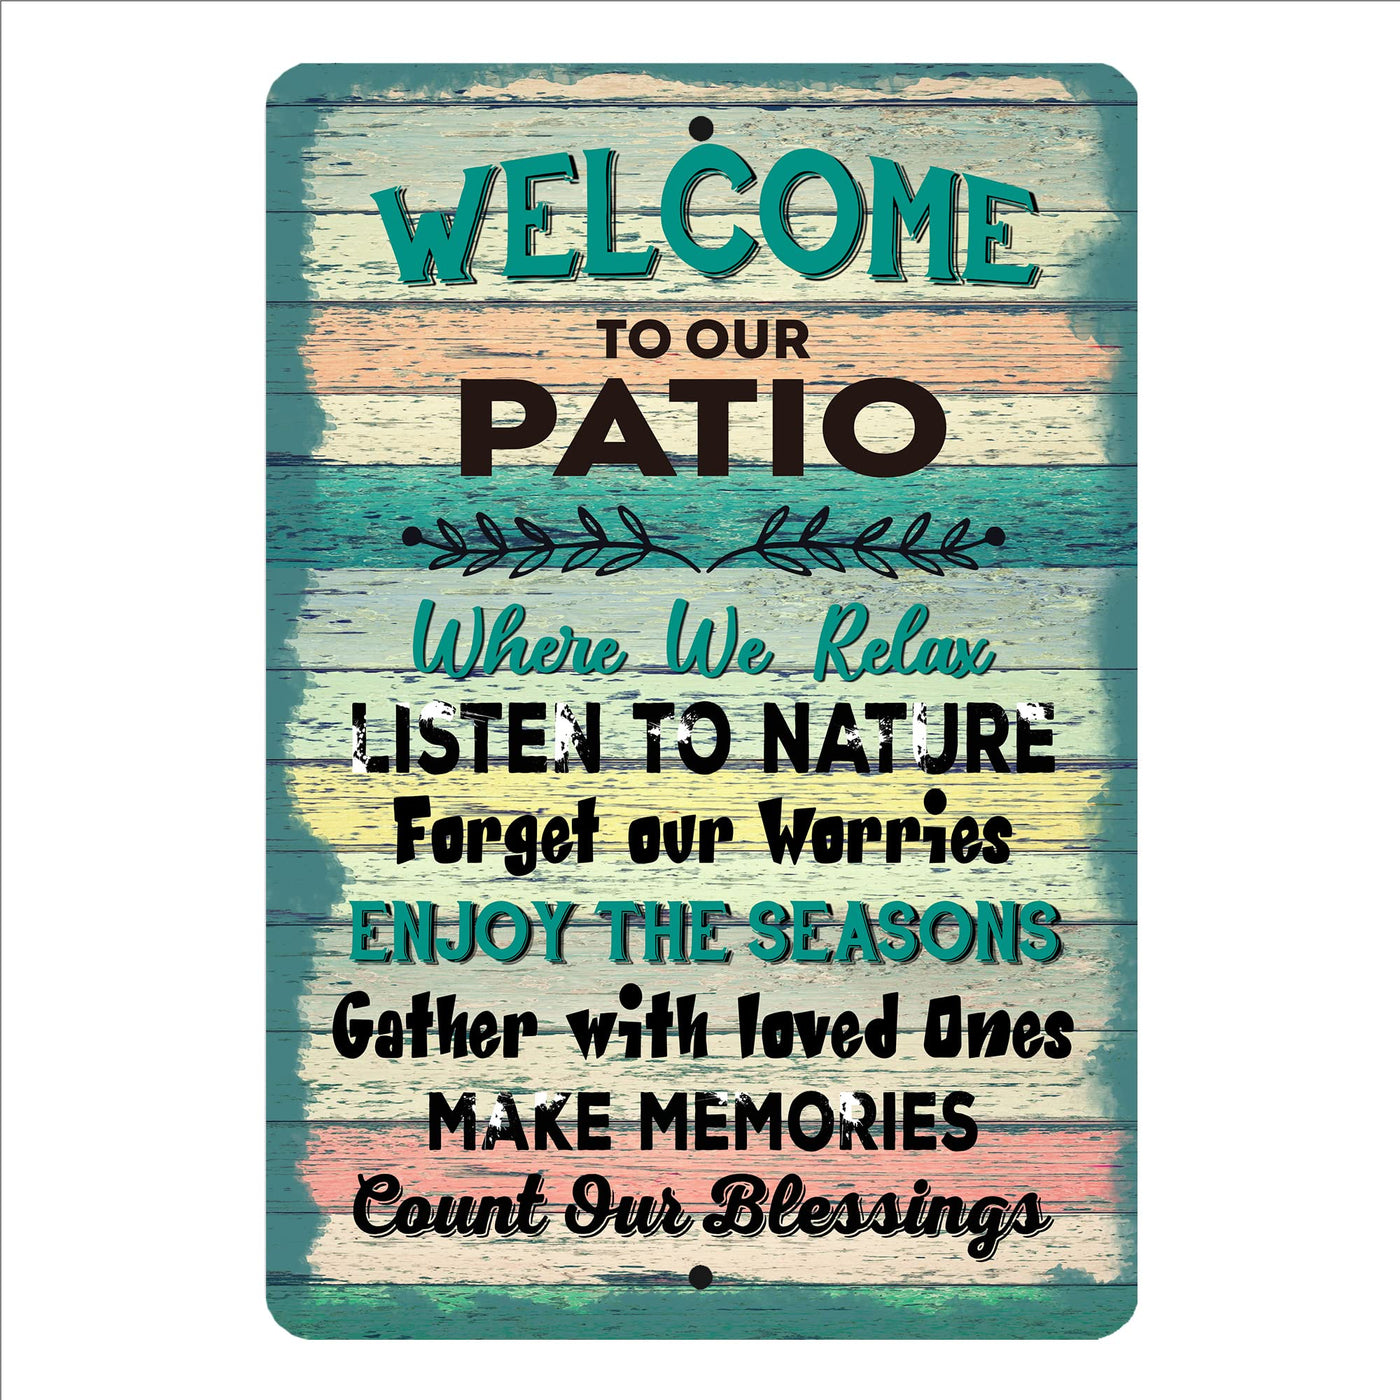 Welcome To Our Patio - Where We Relax Metal Signs Vintage Wall Art -8 x 12" Funny Rustic Outdoor Metal Sign for Lake, Porch, Deck -Retro Tin Sign Decor for Home-Cabin-Lodge Accessories & Gifts!